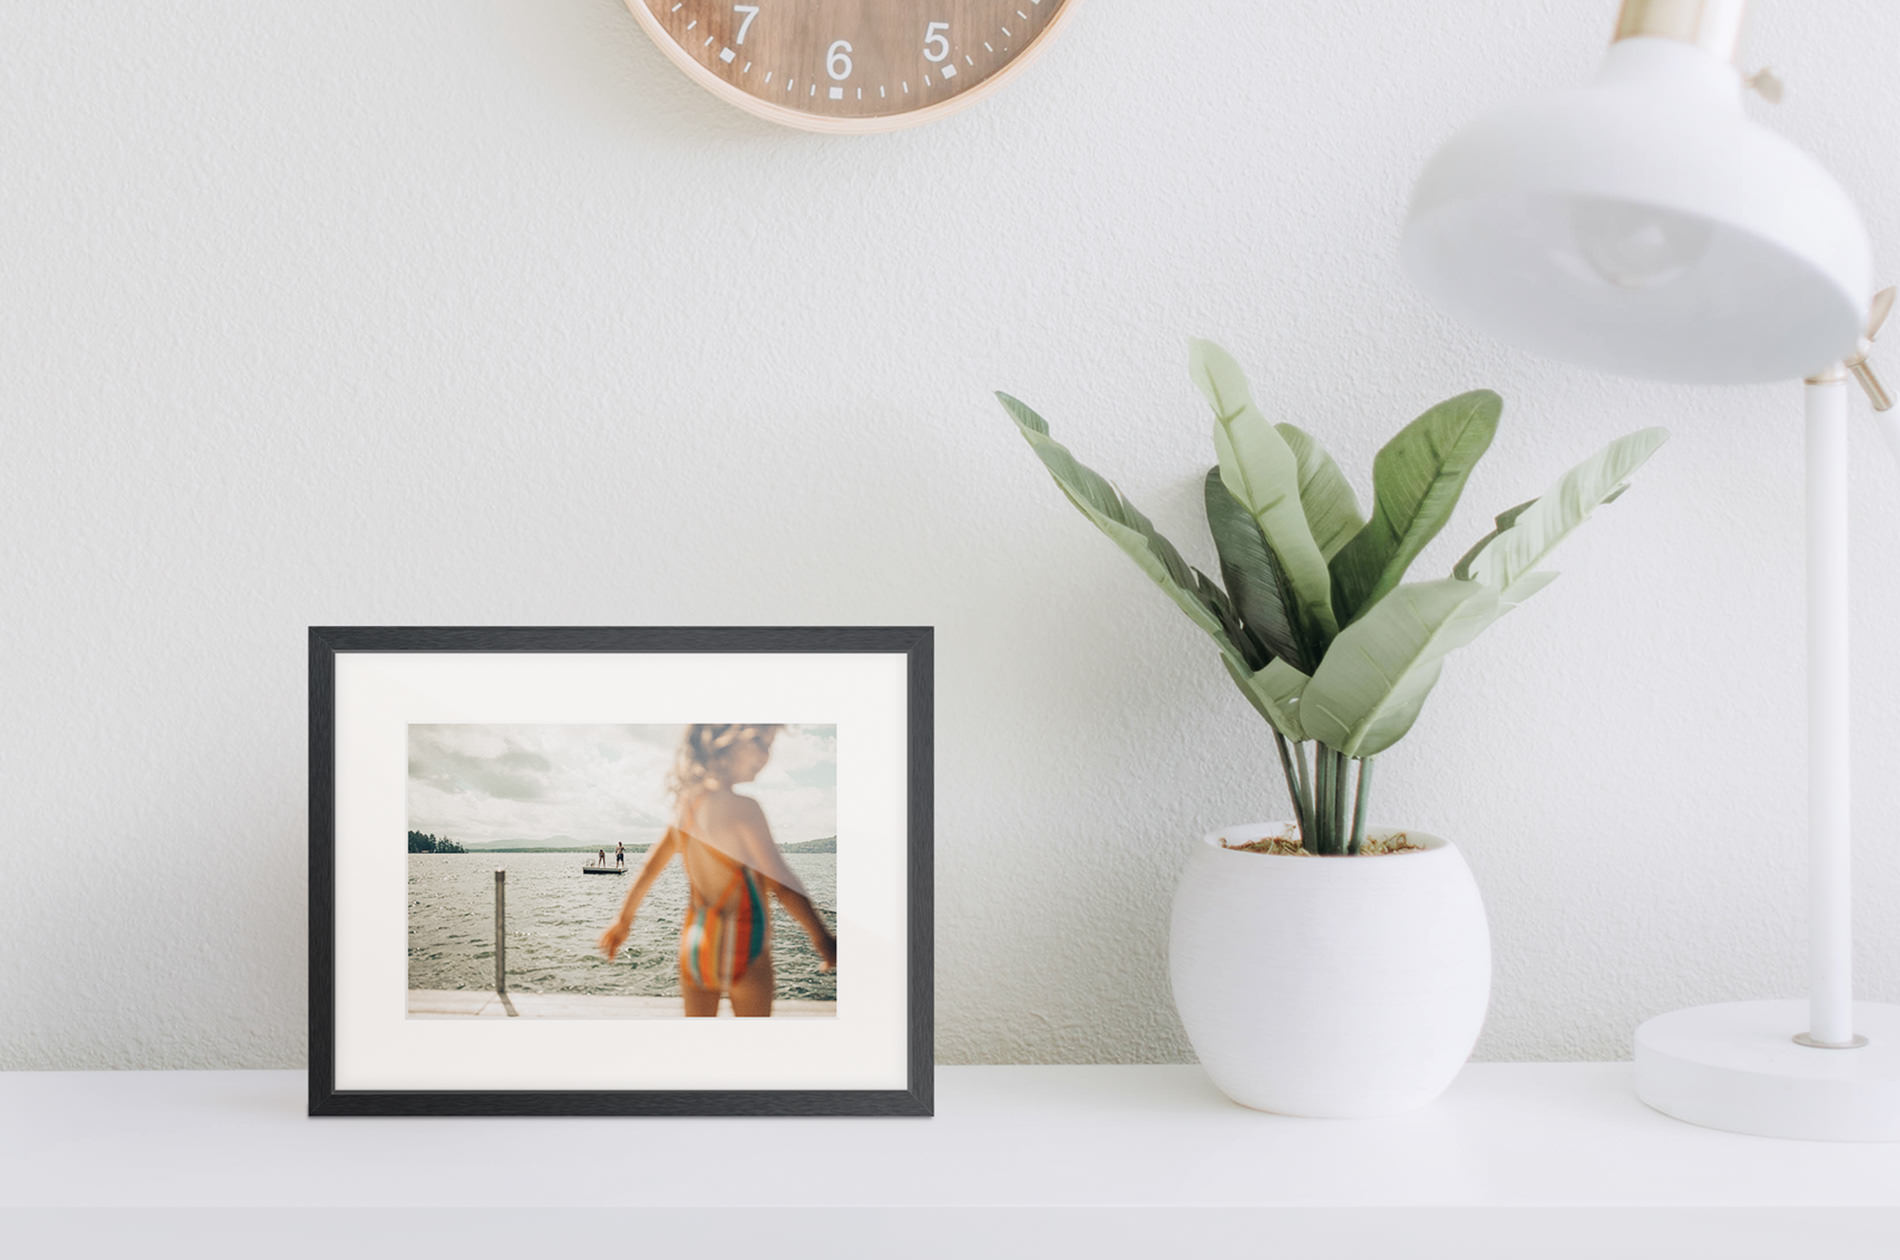 A gallery frame set on a white table, alongside a pot plant and white lamp.